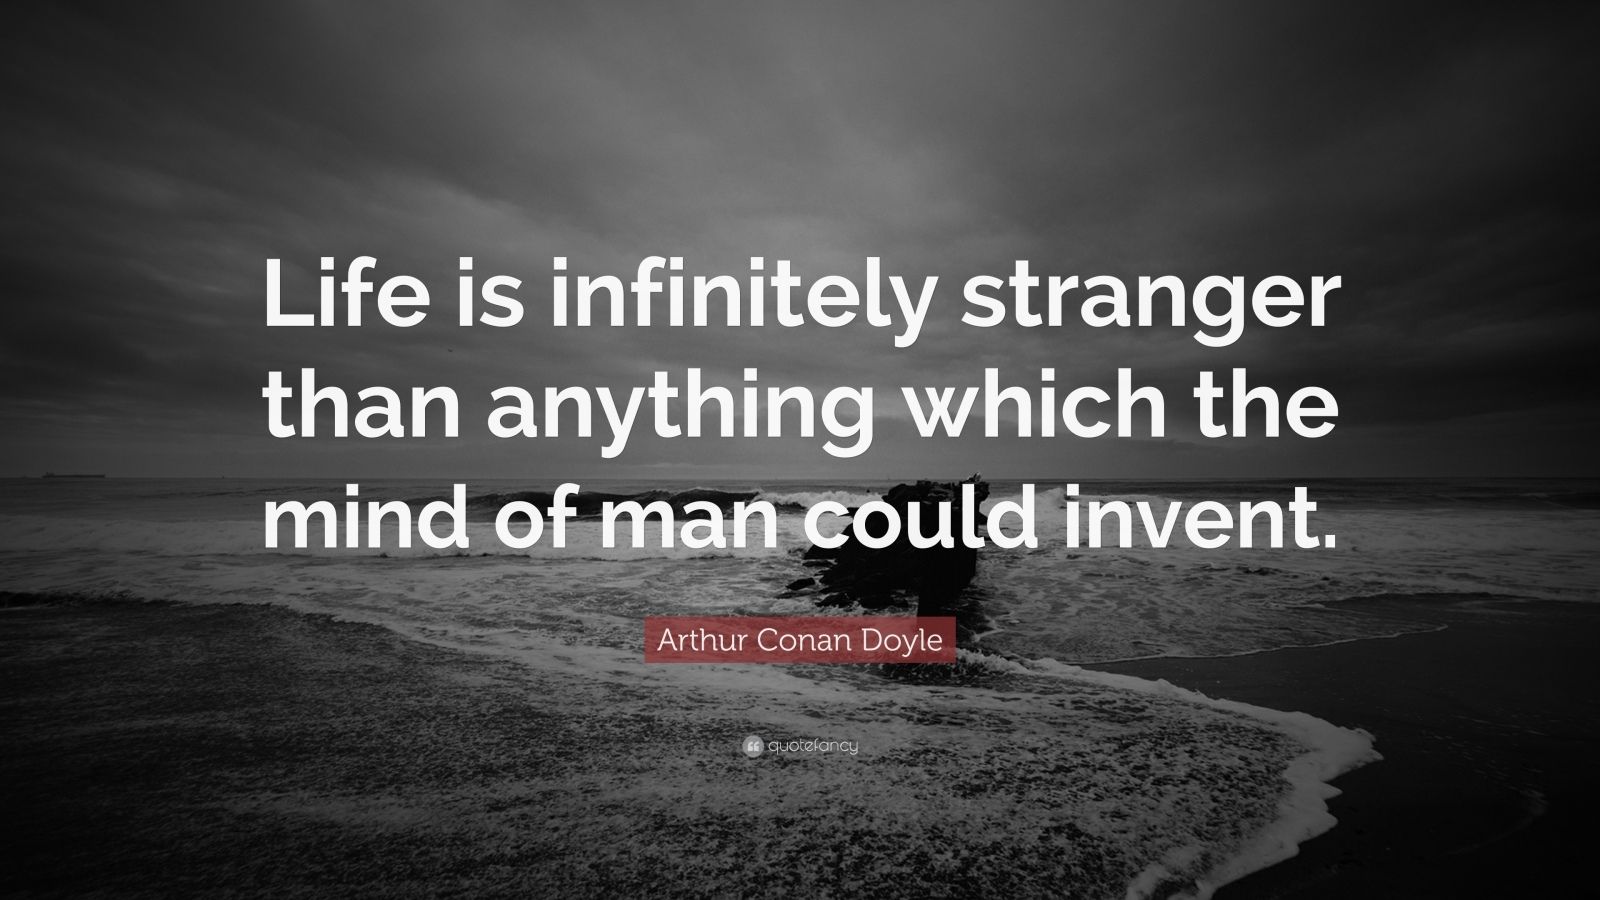 Arthur Conan Doyle Quote “Life is infinitely stranger than anything which the mind of